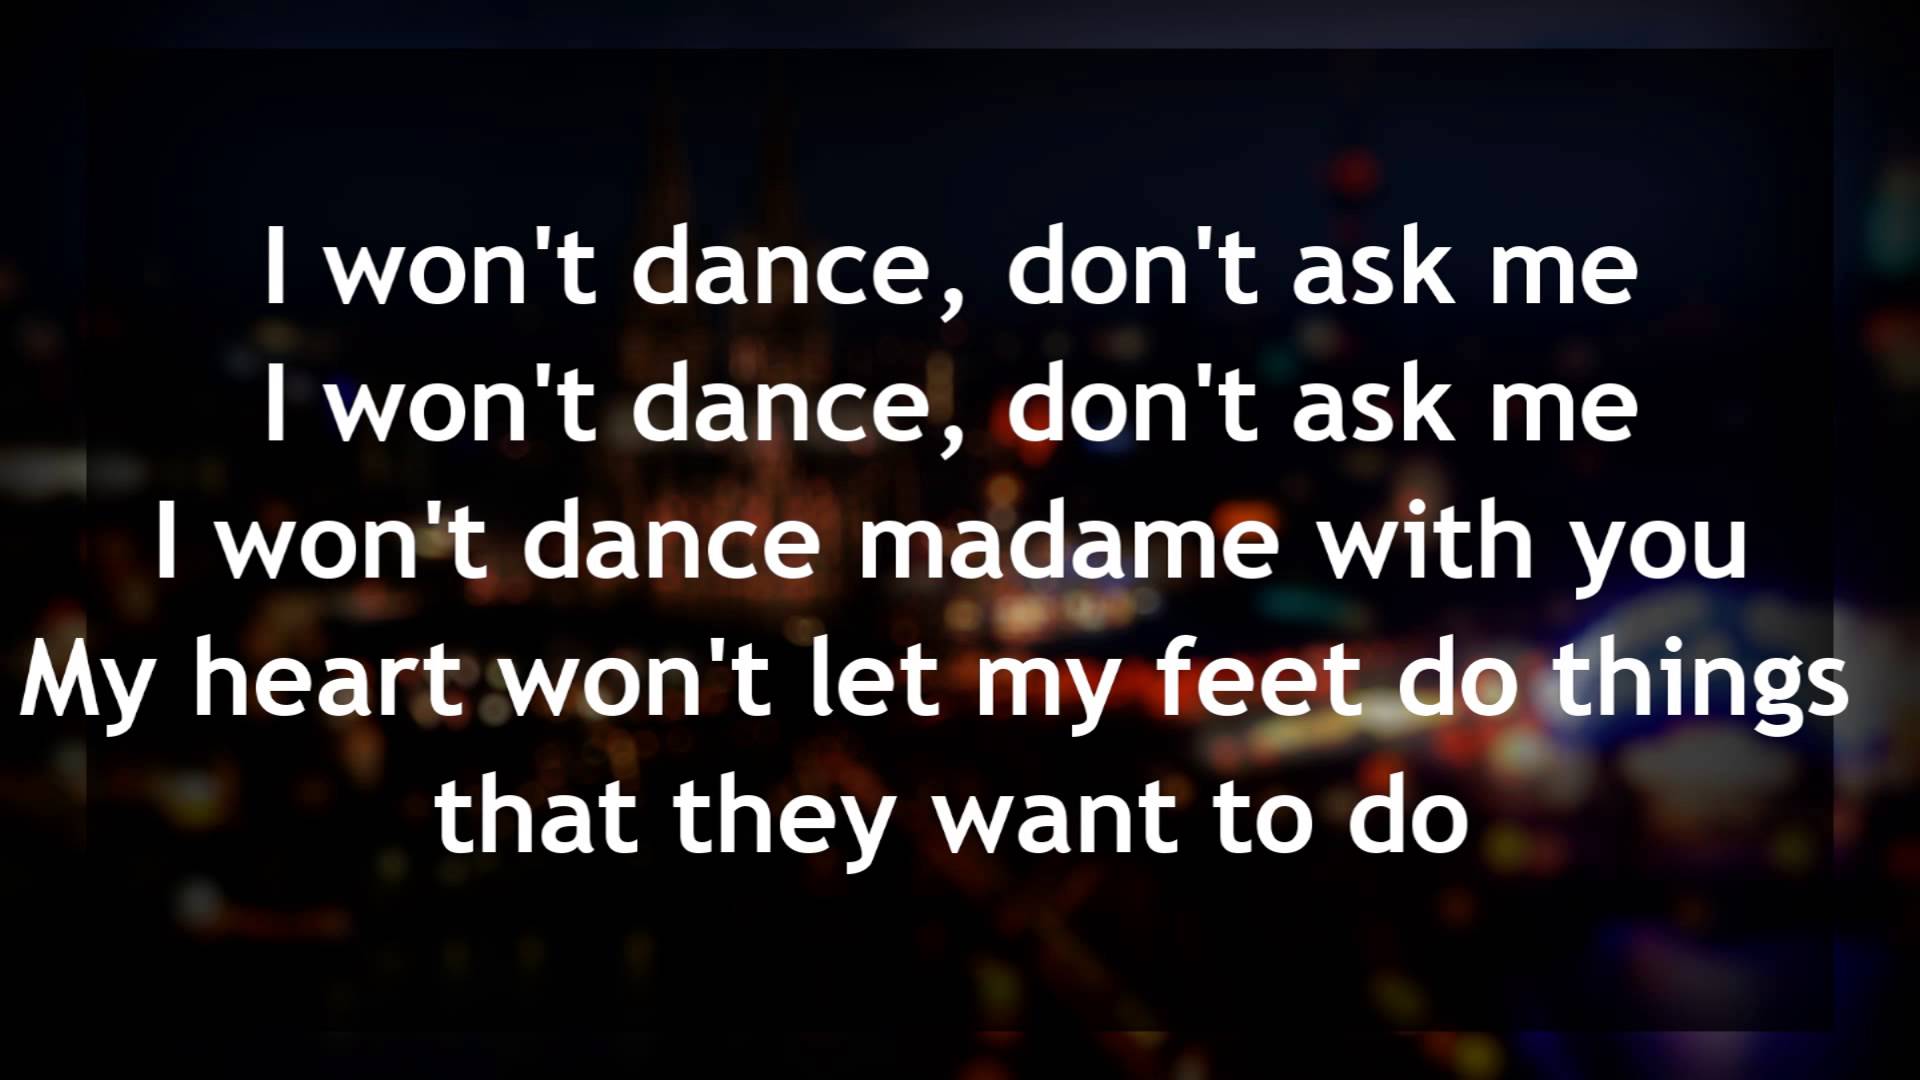 Song lyrics to I Won't Dance, performed in Lovely to Look At, Roberta, and more